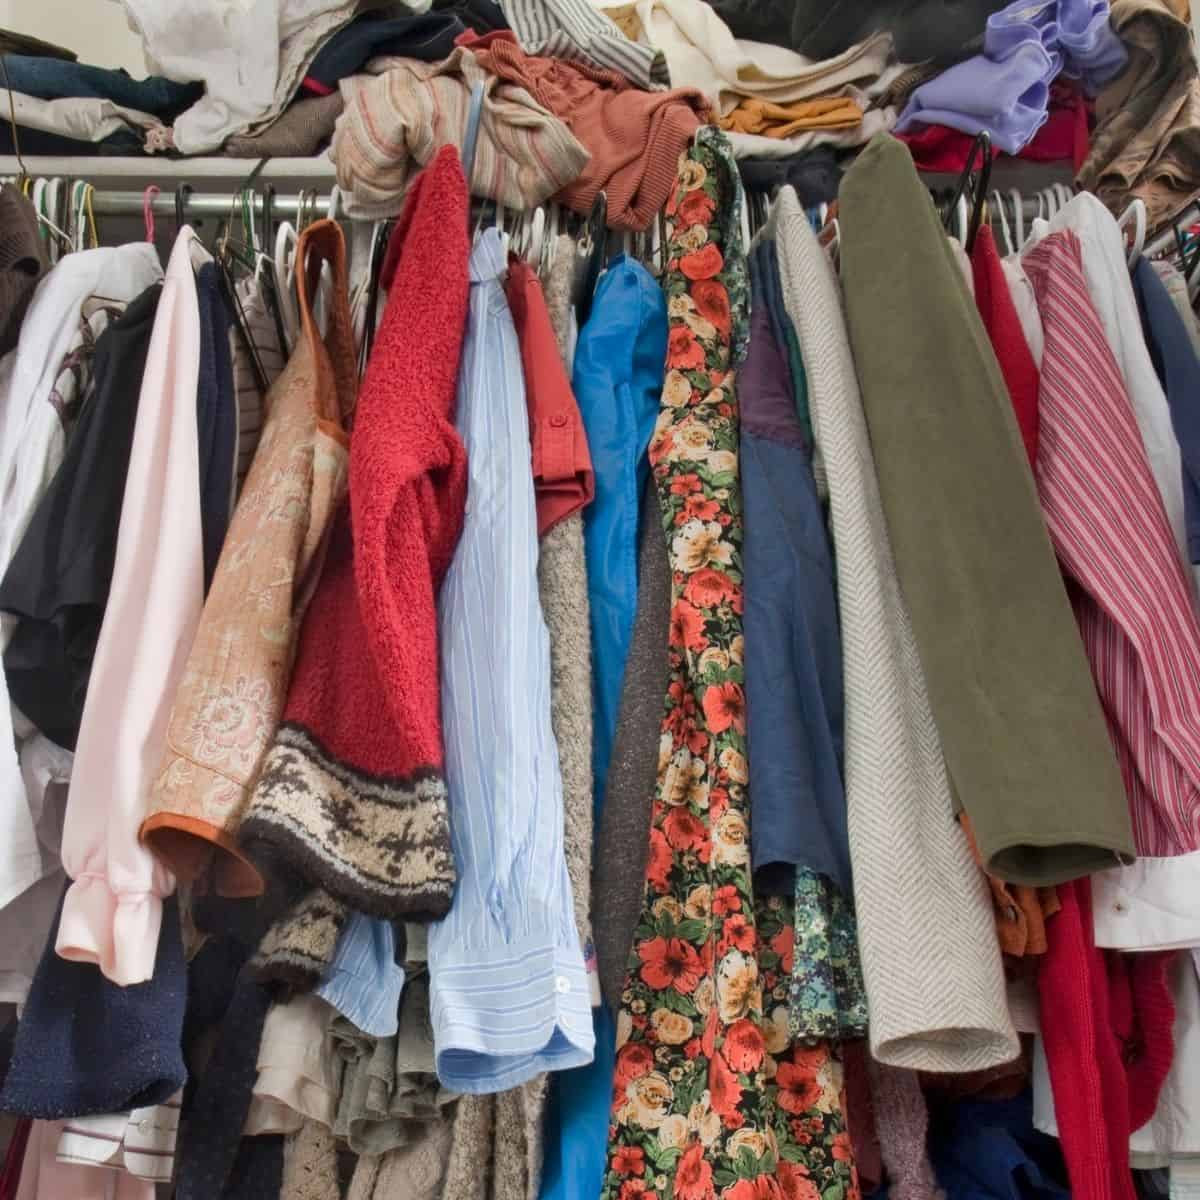 Why You Have Too Many Clothes and How to Fix It